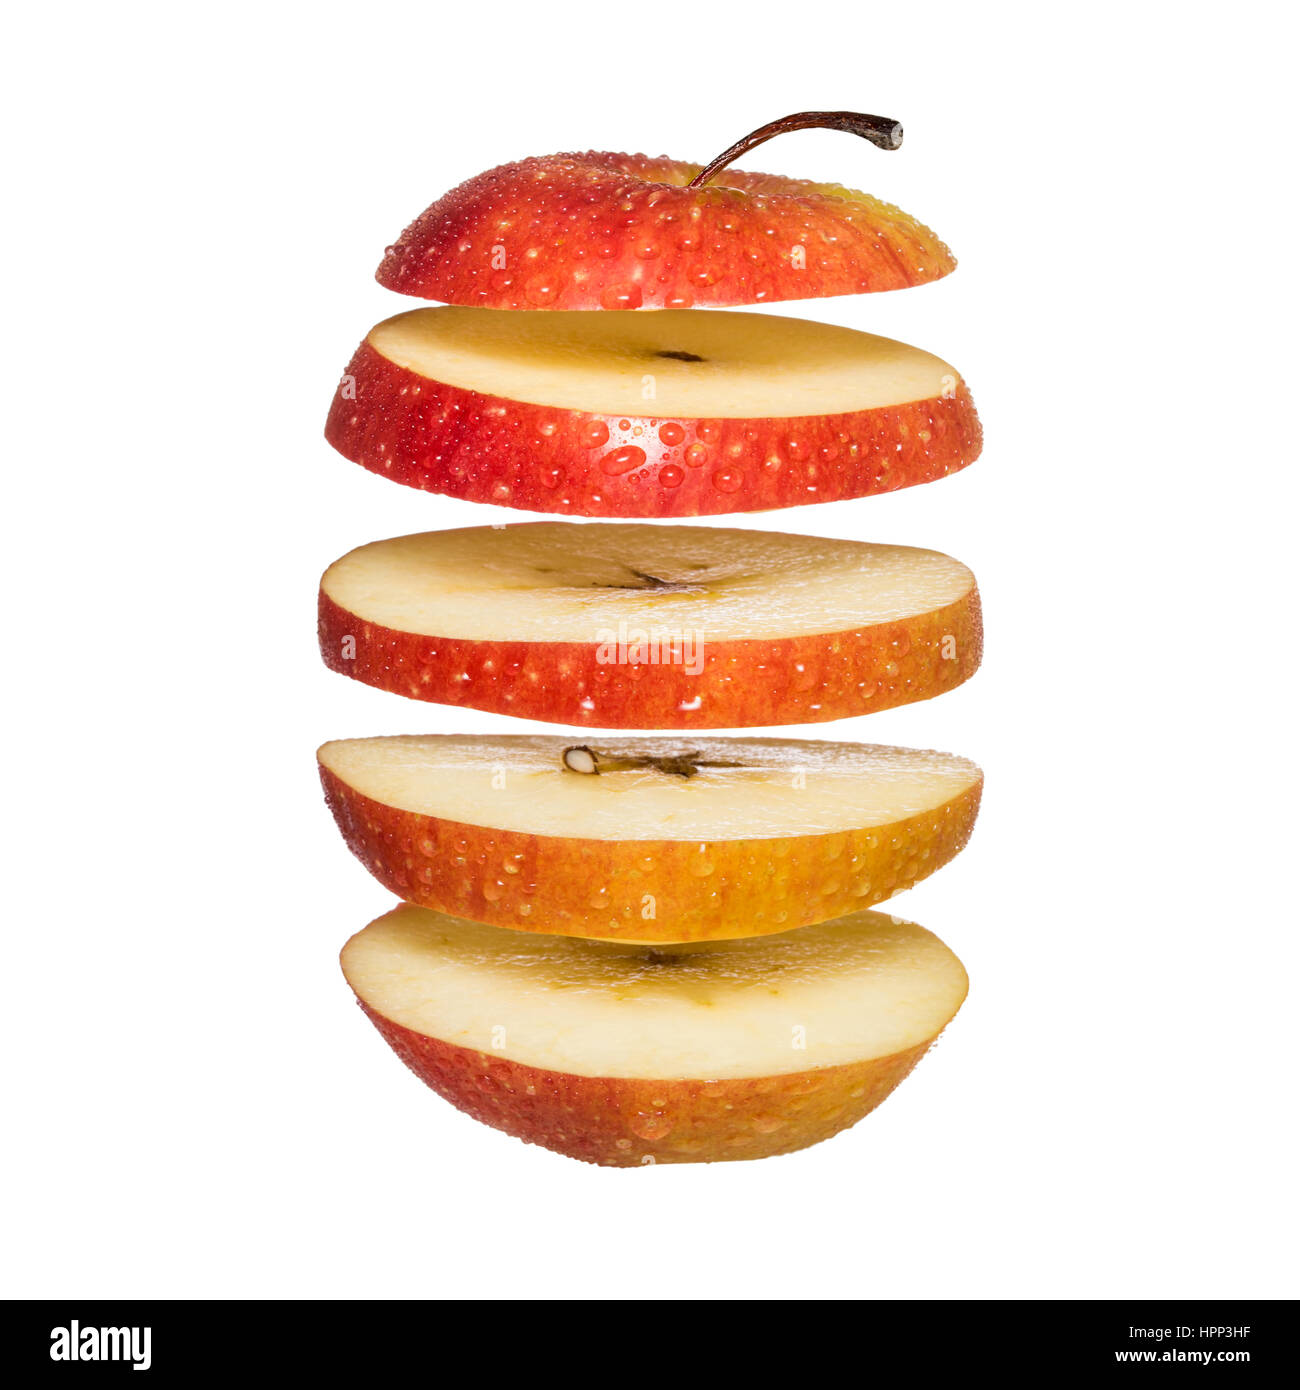 Flying apple. Sliced red apple isolated on white background. Levity fruit floating in the air Stock Photo